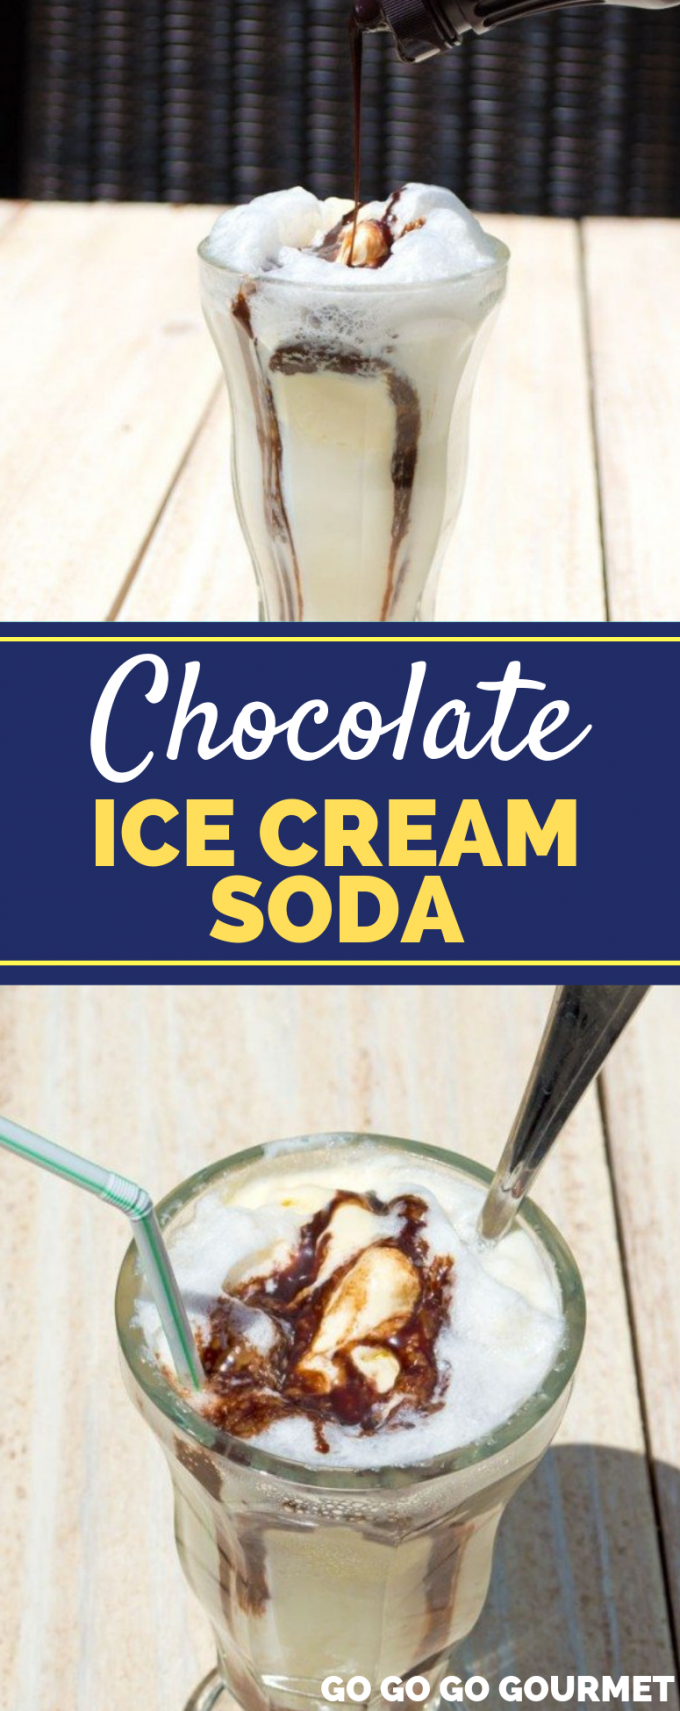 Forget vanilla and strawberry, this old fashioned Chocolate Ice Cream Soda recipe is the perfect sweet treat for any party! Similar to a root beer float, it's sure to become one of your favorite new desserts! #gogogogourmet #chocolateicecreamsoda #icecreamsoda #summerdesserts via @gogogogourmet